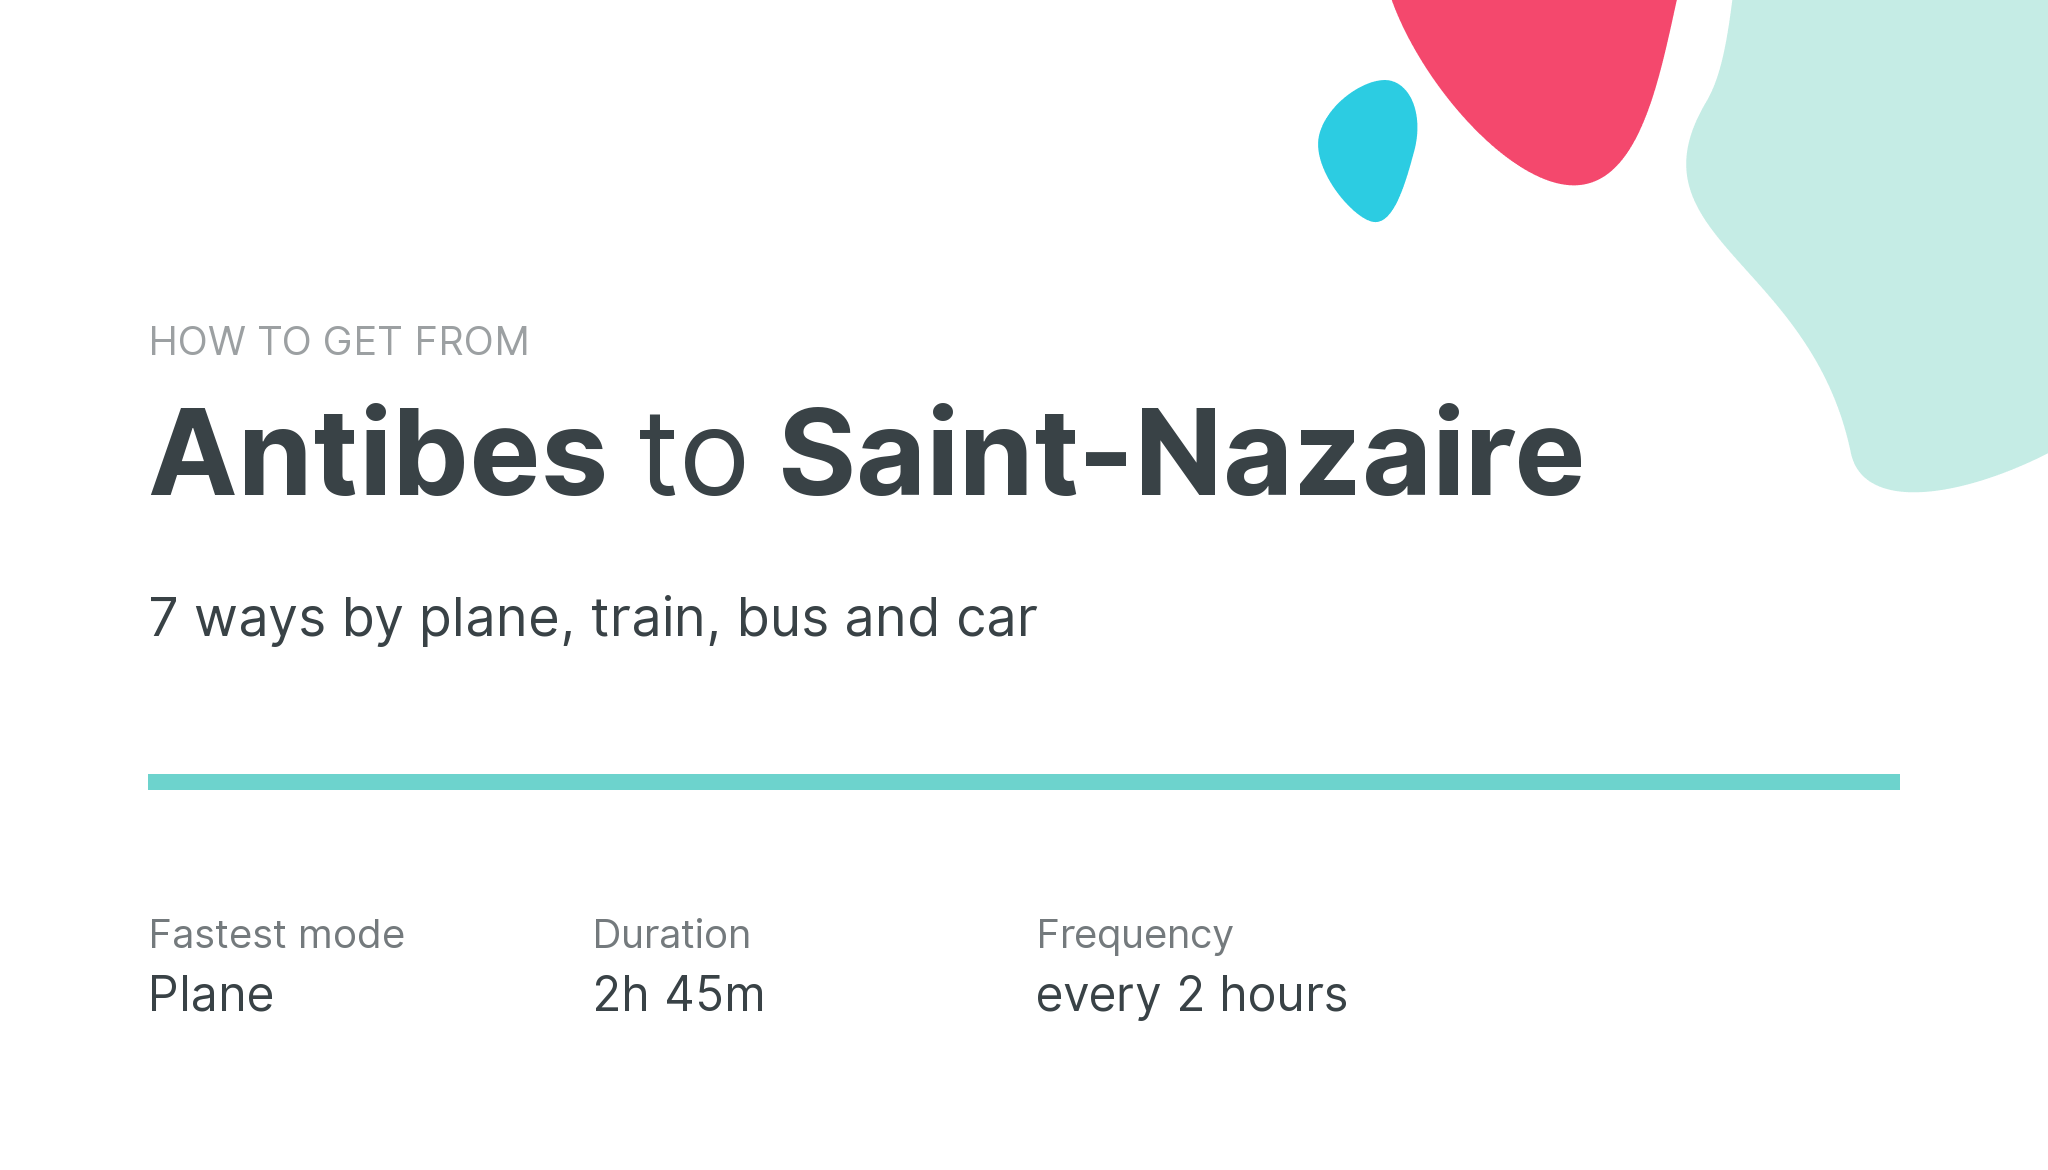 How do I get from Antibes to Saint-Nazaire